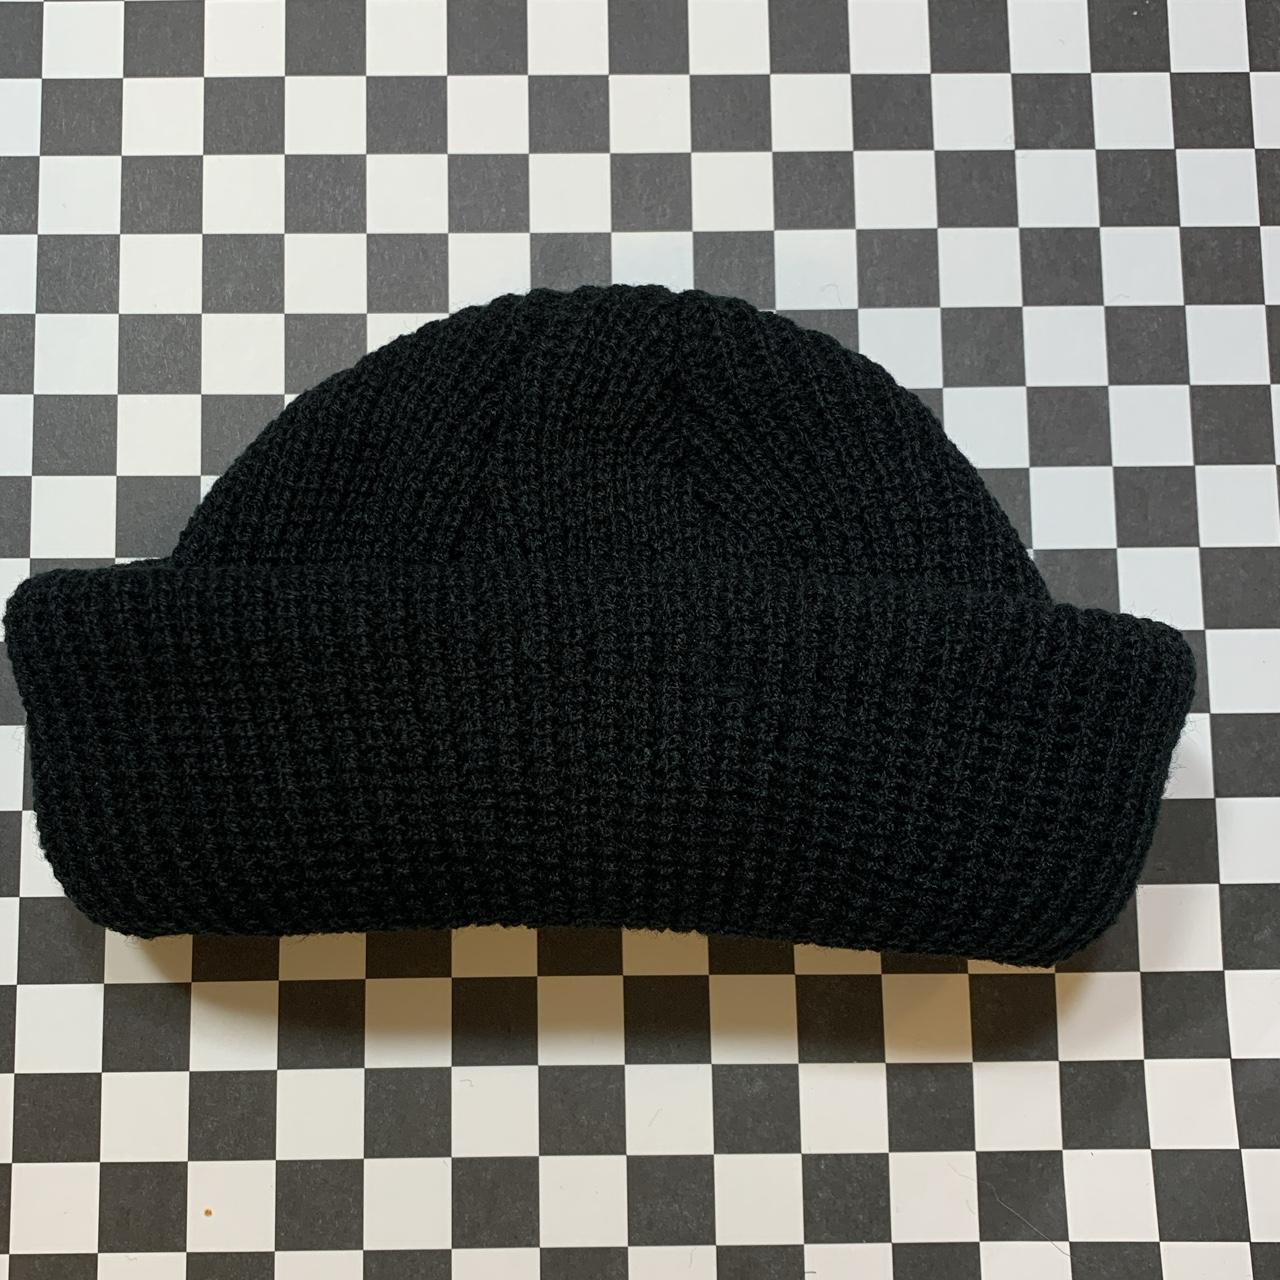 Black fisherman beanie AVAILABLE FOR $29.99... - Depop